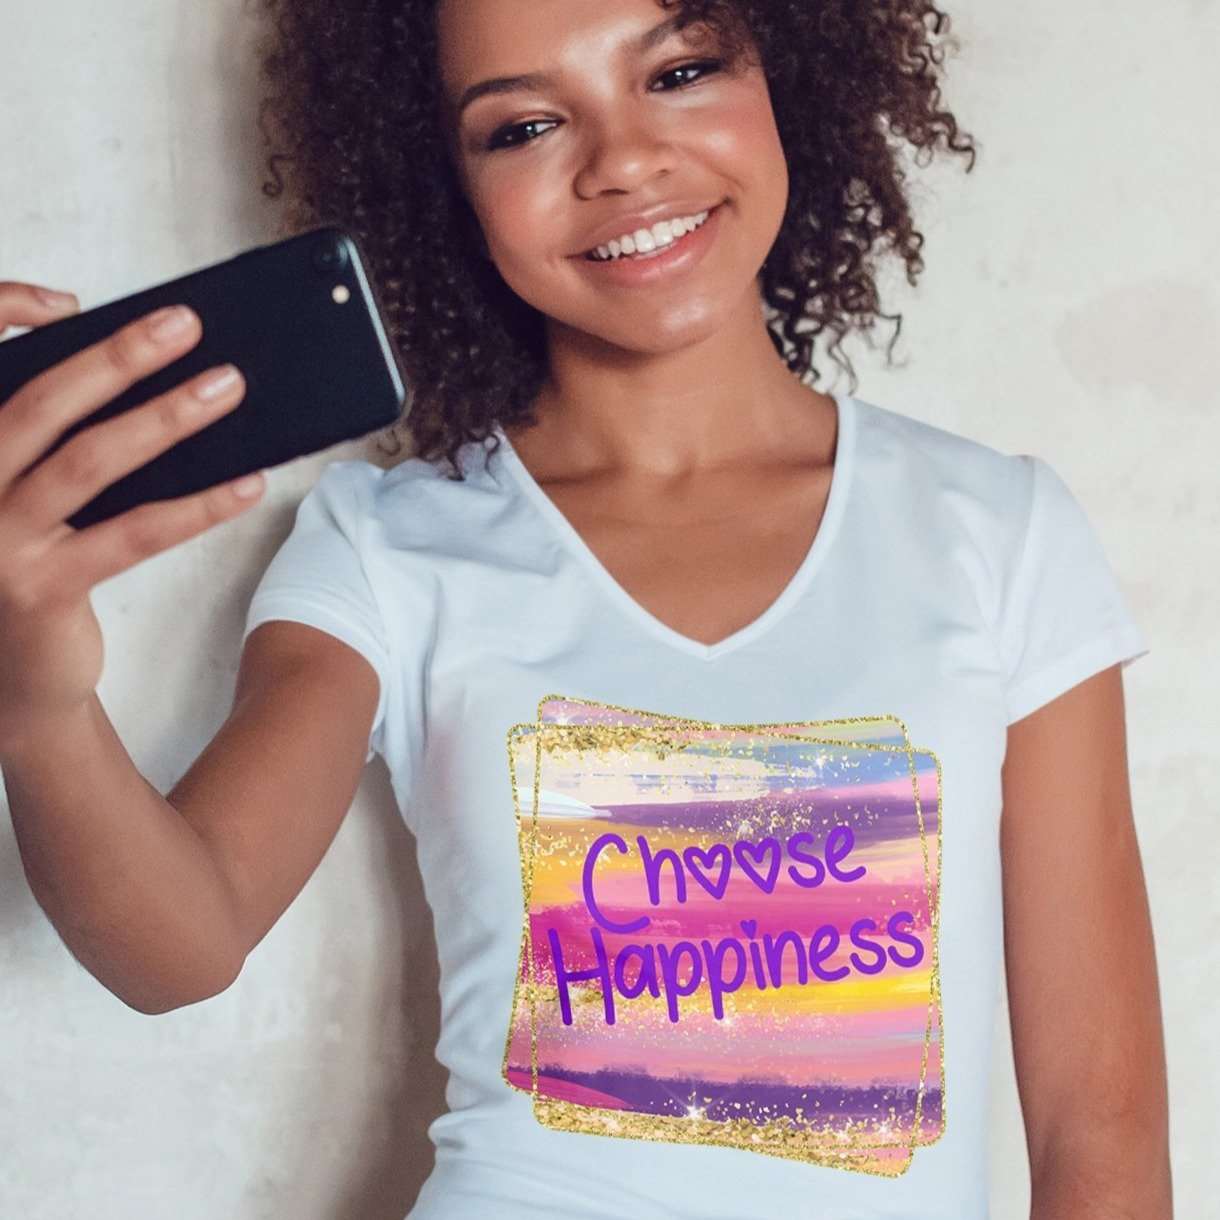 Choose Happiness Graphic T-Shirt - My Custom Tee Party